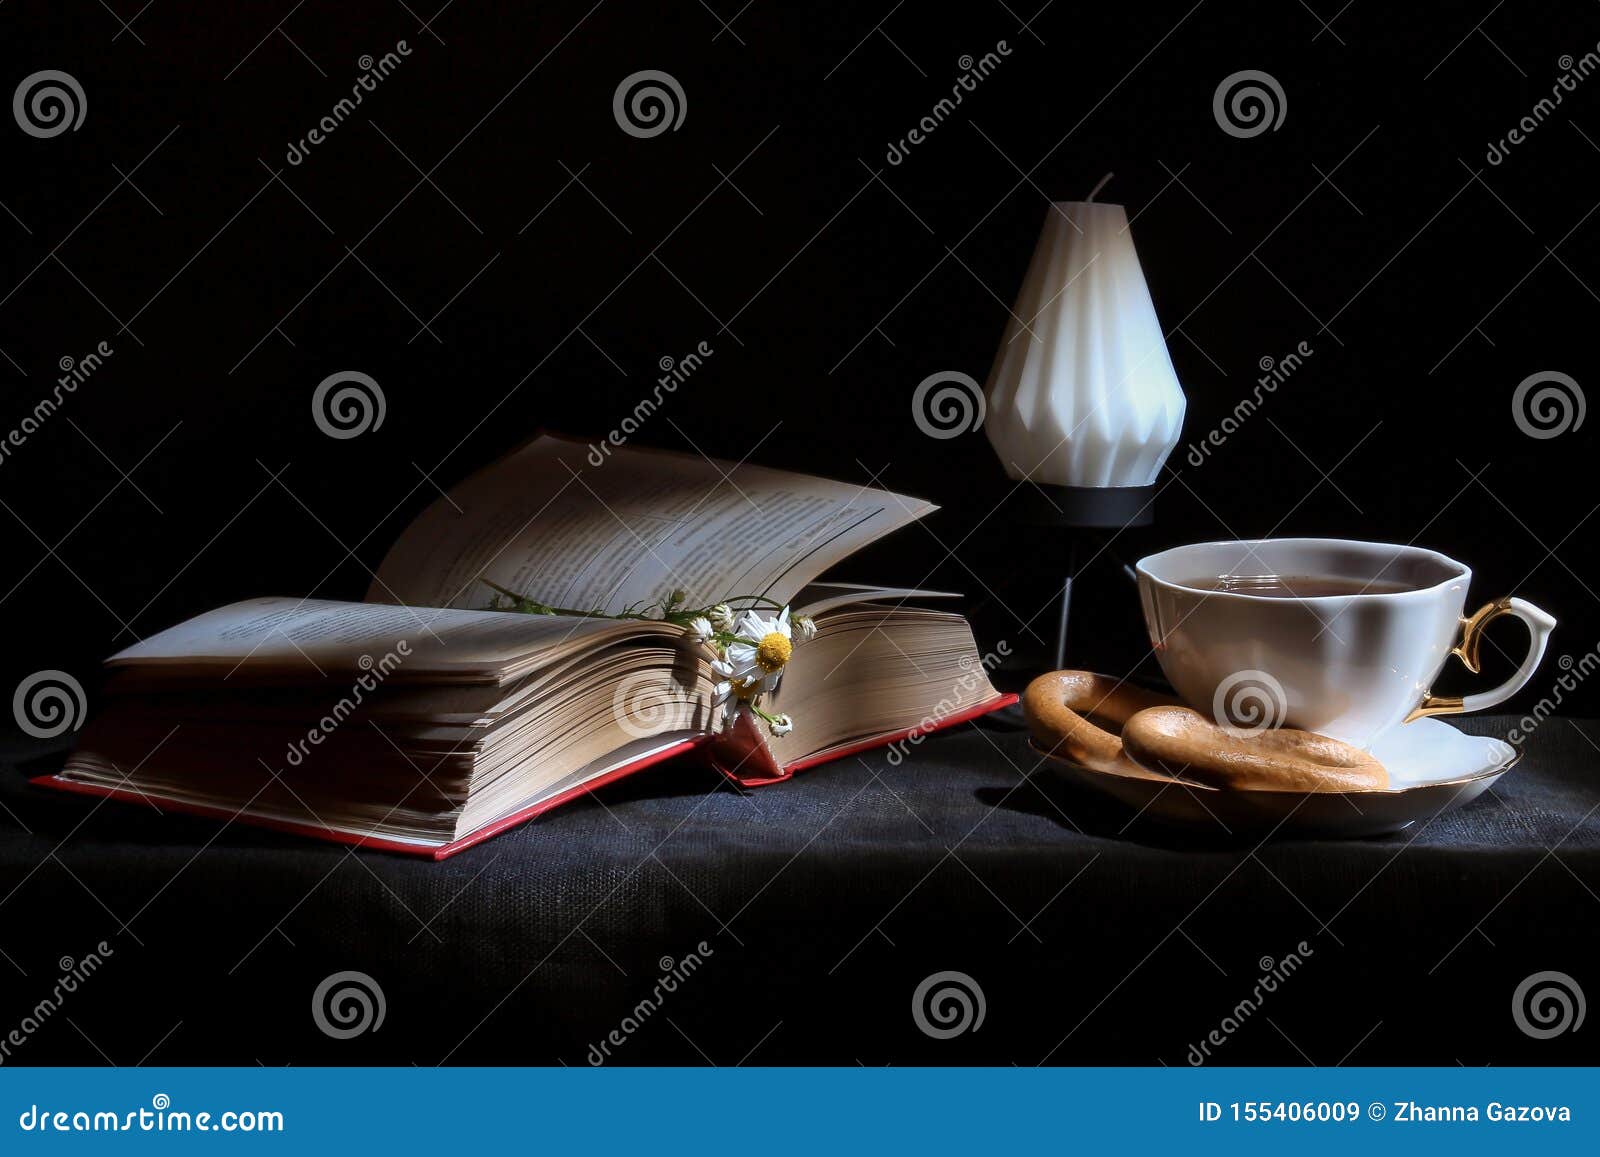 Cup of Tea with Open Book and Candle Close Up, Black Background. Autumn  Concept. Picture of Wallpaper Stock Image - Image of antique, life:  155406009